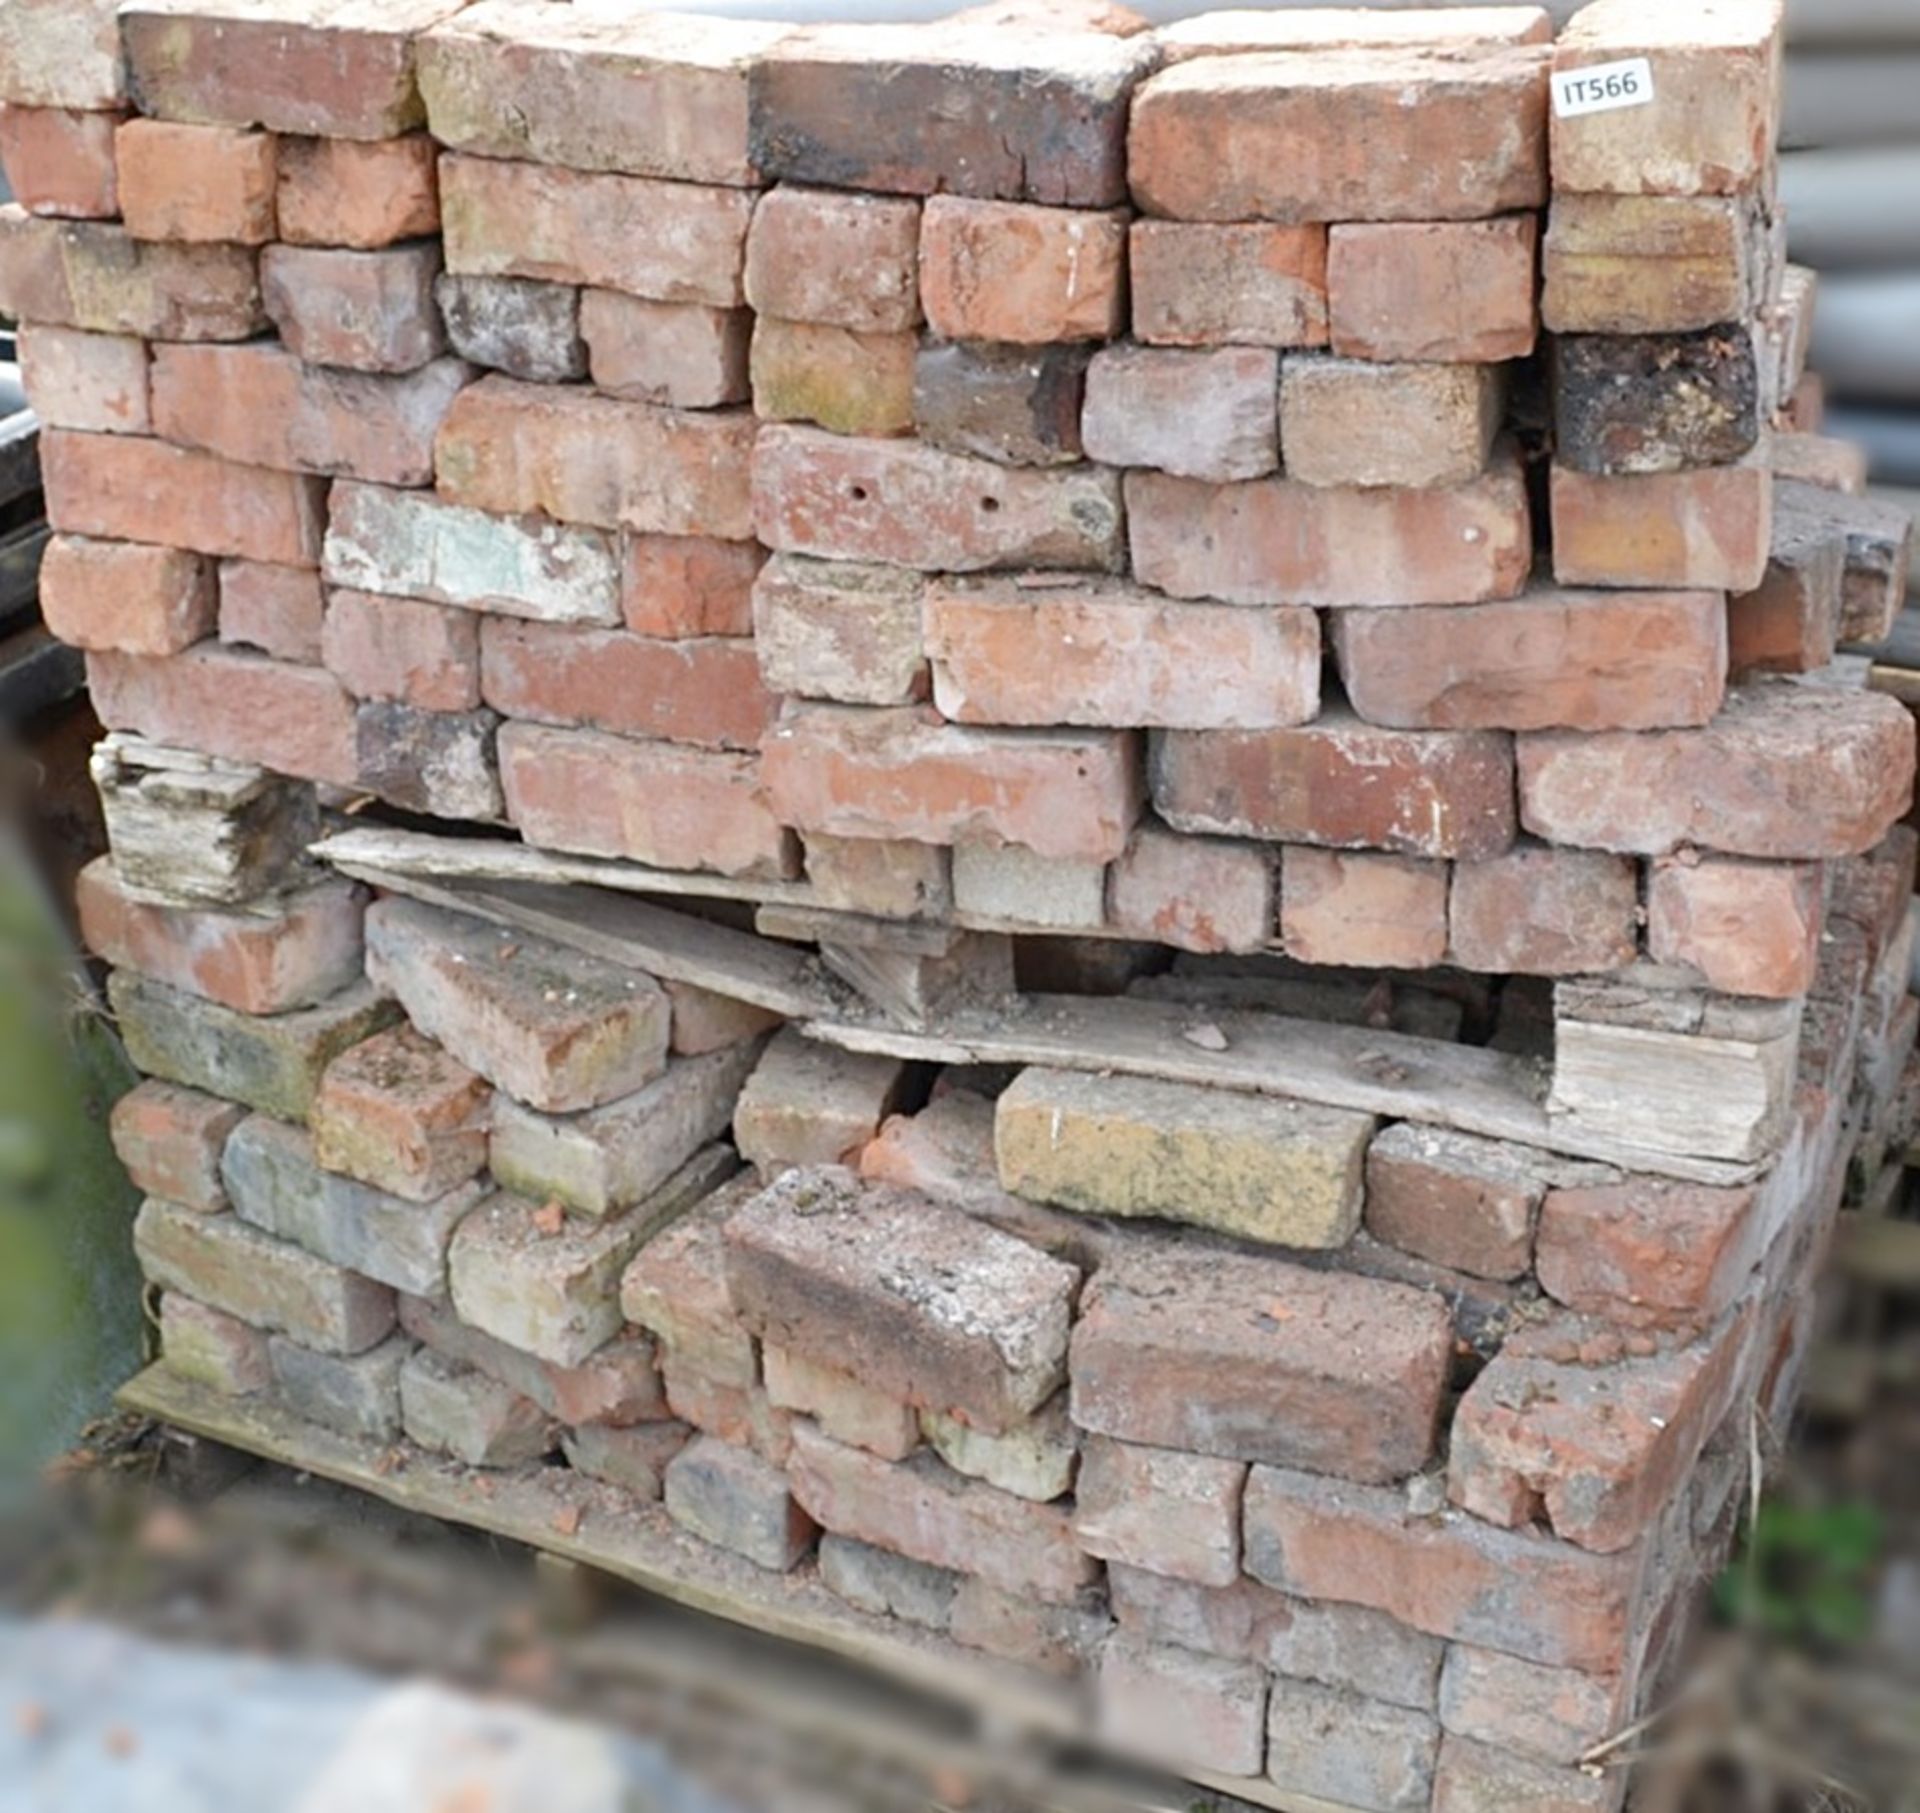 Assorted Reclaimed Hand Made Bricks - Approx 180 In Total - Average Dimensions: 22x11x7.5cm - Ref: